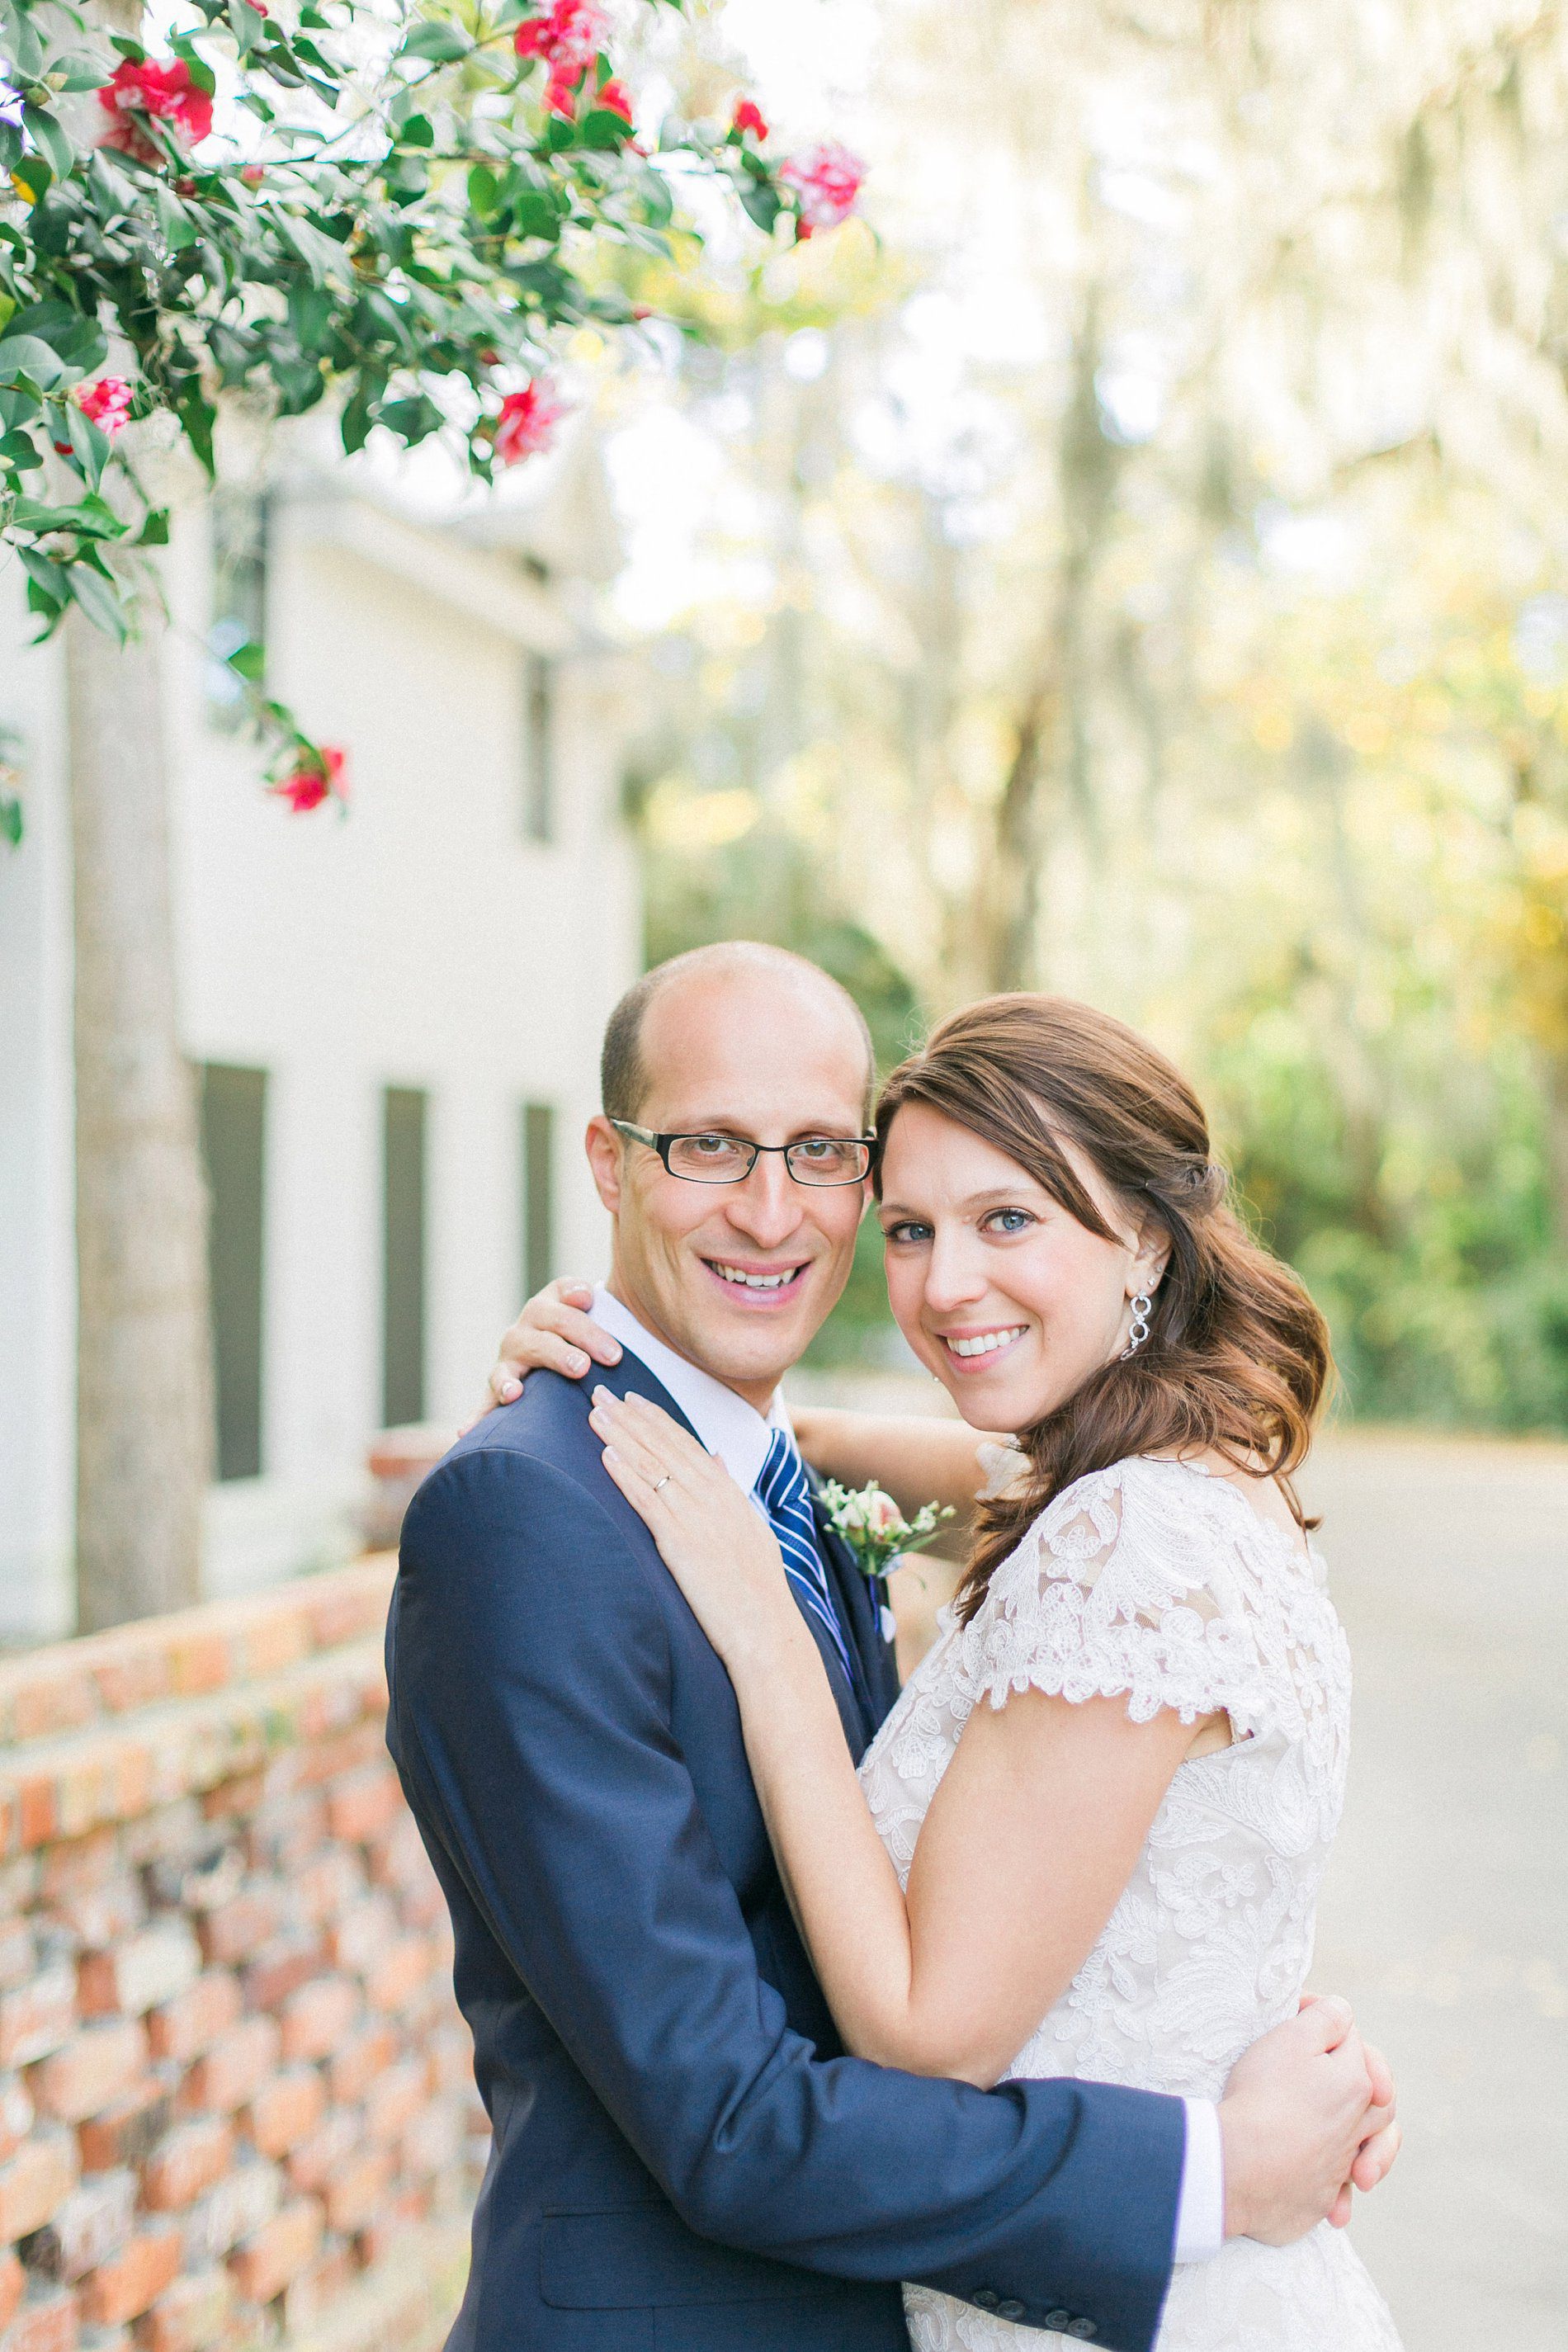 Golden hour wedding portraits of the bride and groom by Catherine Ann Photography